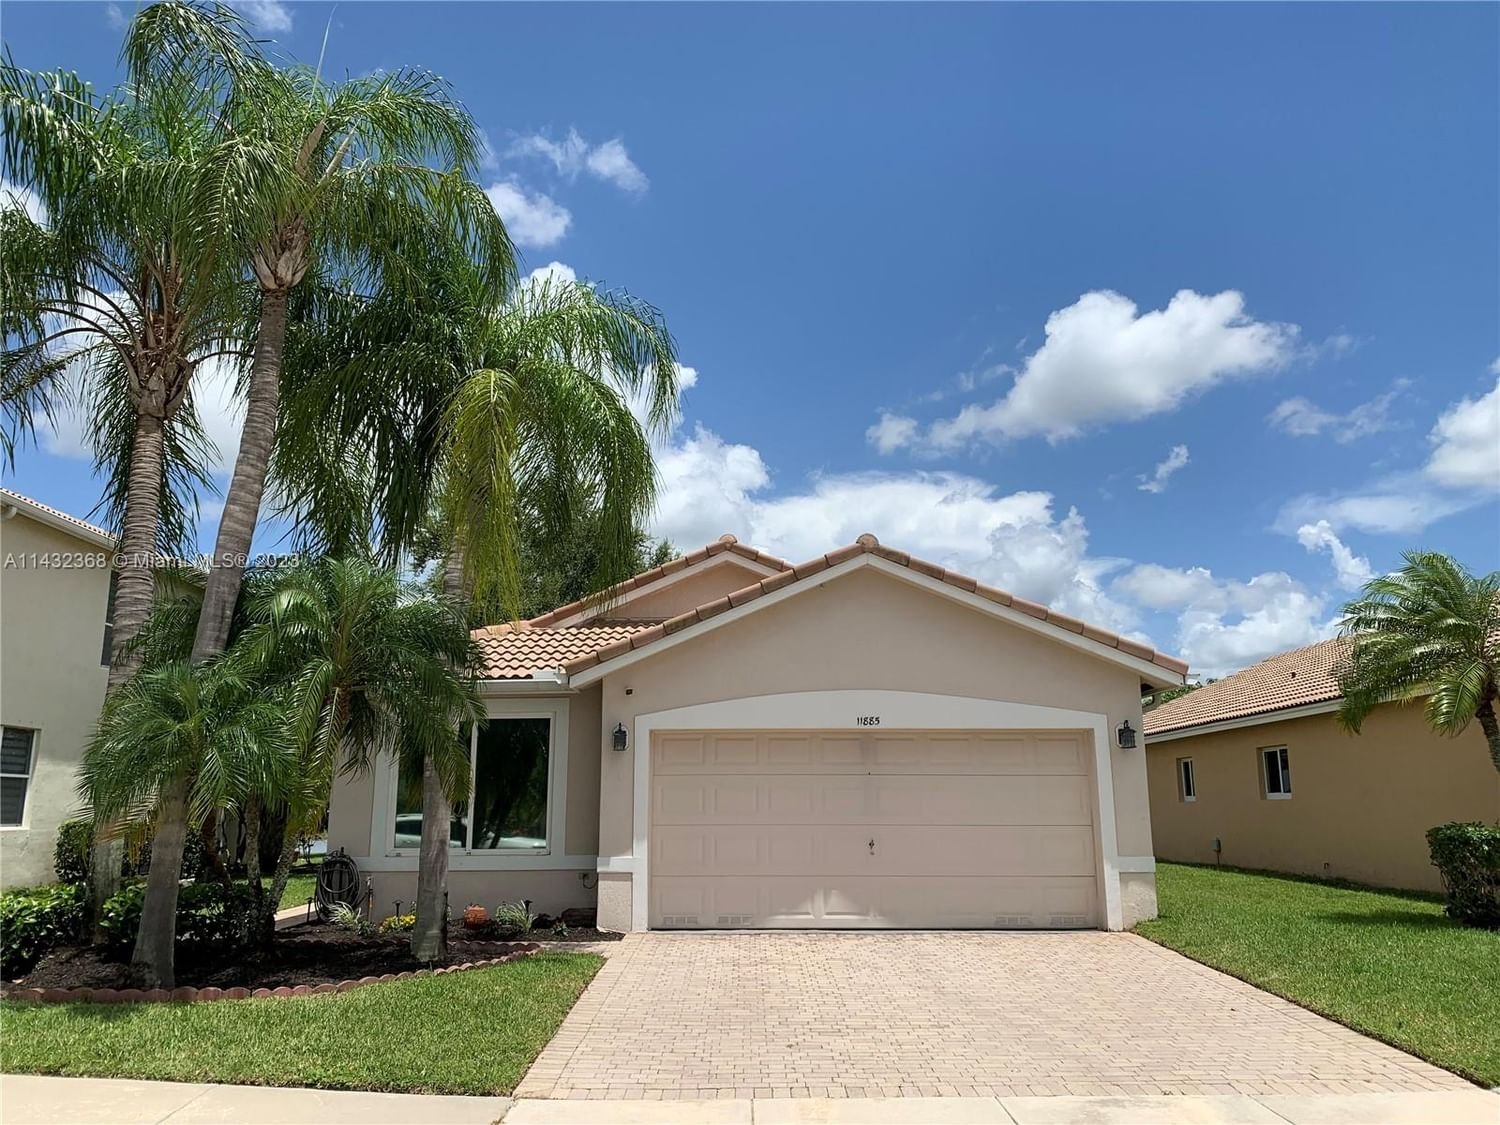 Real estate property located at 11885 7th St, Broward County, Pembroke Pines, FL